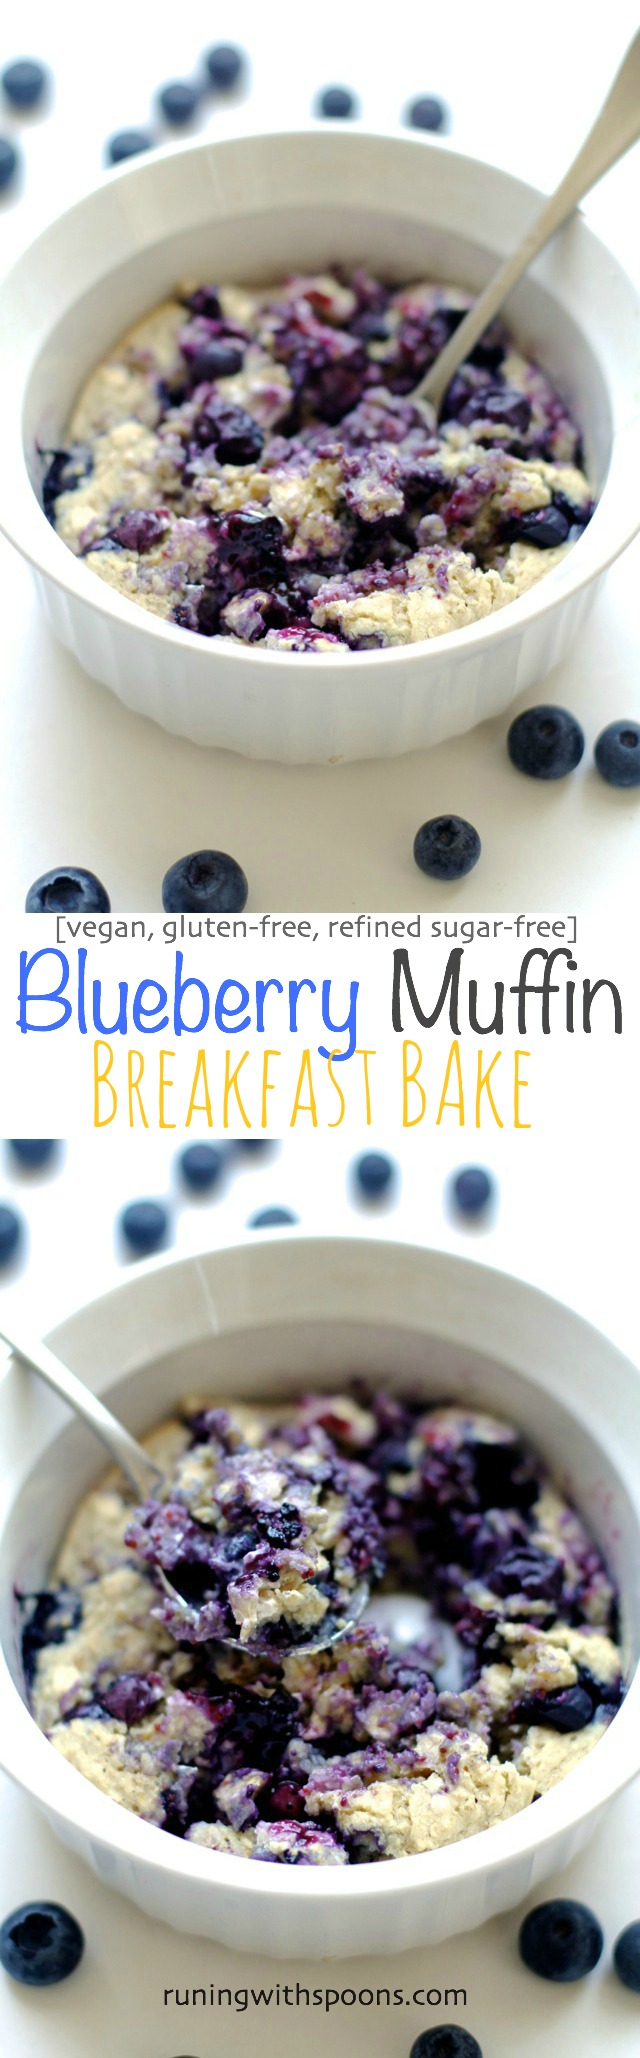 Blueberry Muffin Breakfast Bake -- tastes just like a blueberry muffin, but without any butter, oil, or refined sugar! | runningwithspoons.com #vegan #glutenfree #recipe #healthy